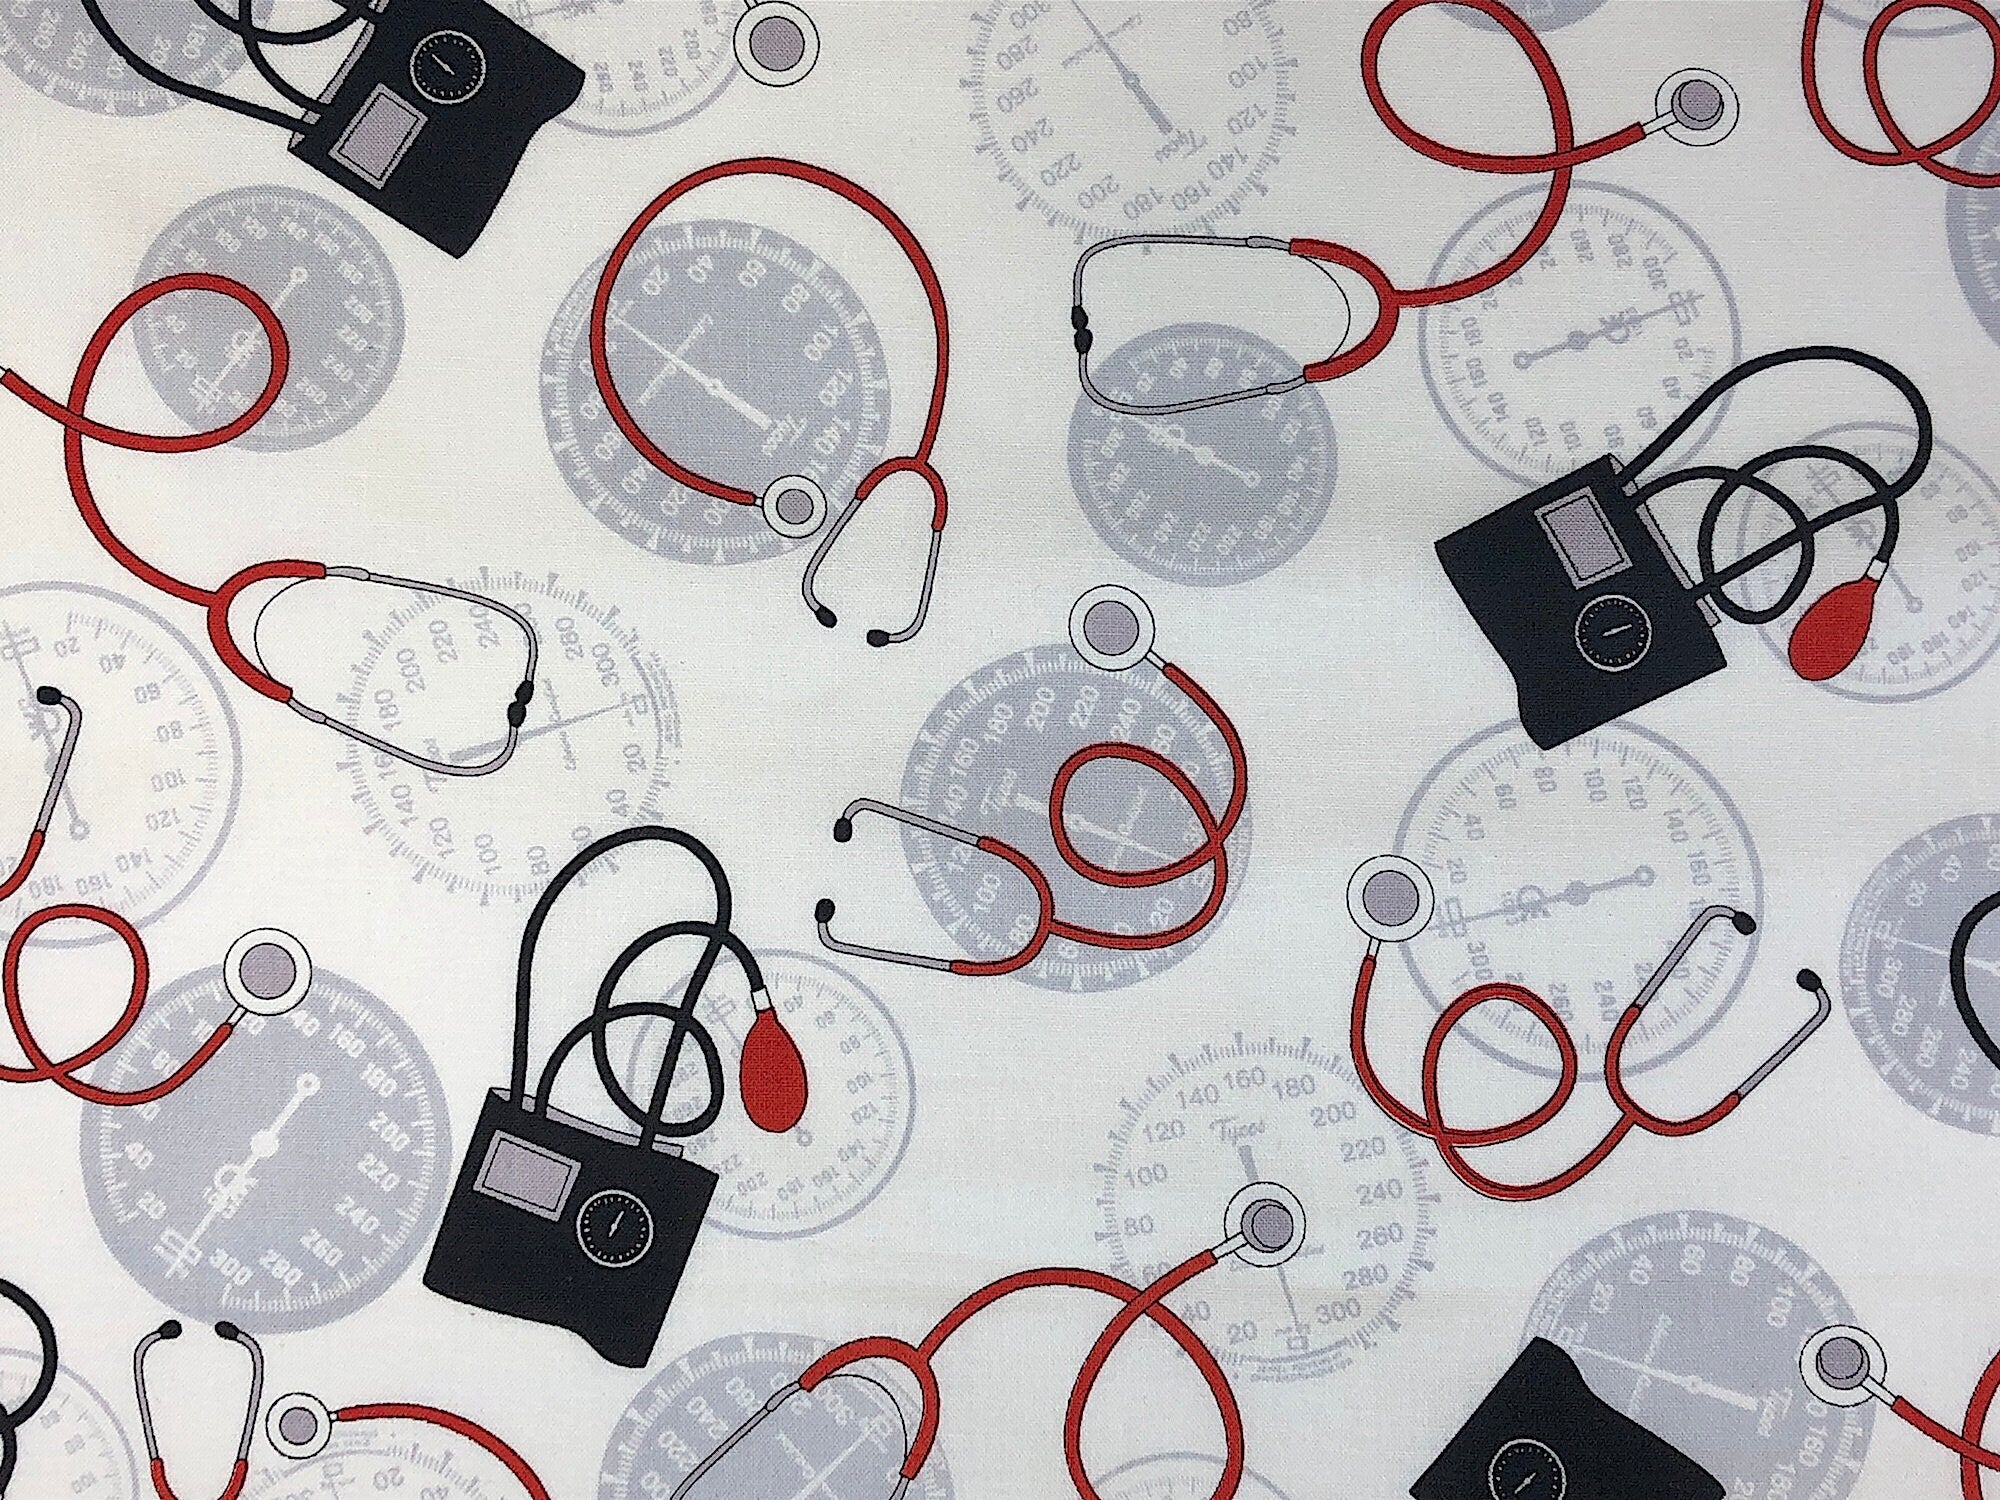 This fabric is called Calling All Nurses and is covered in stethoscopes and blood pressure equipment.